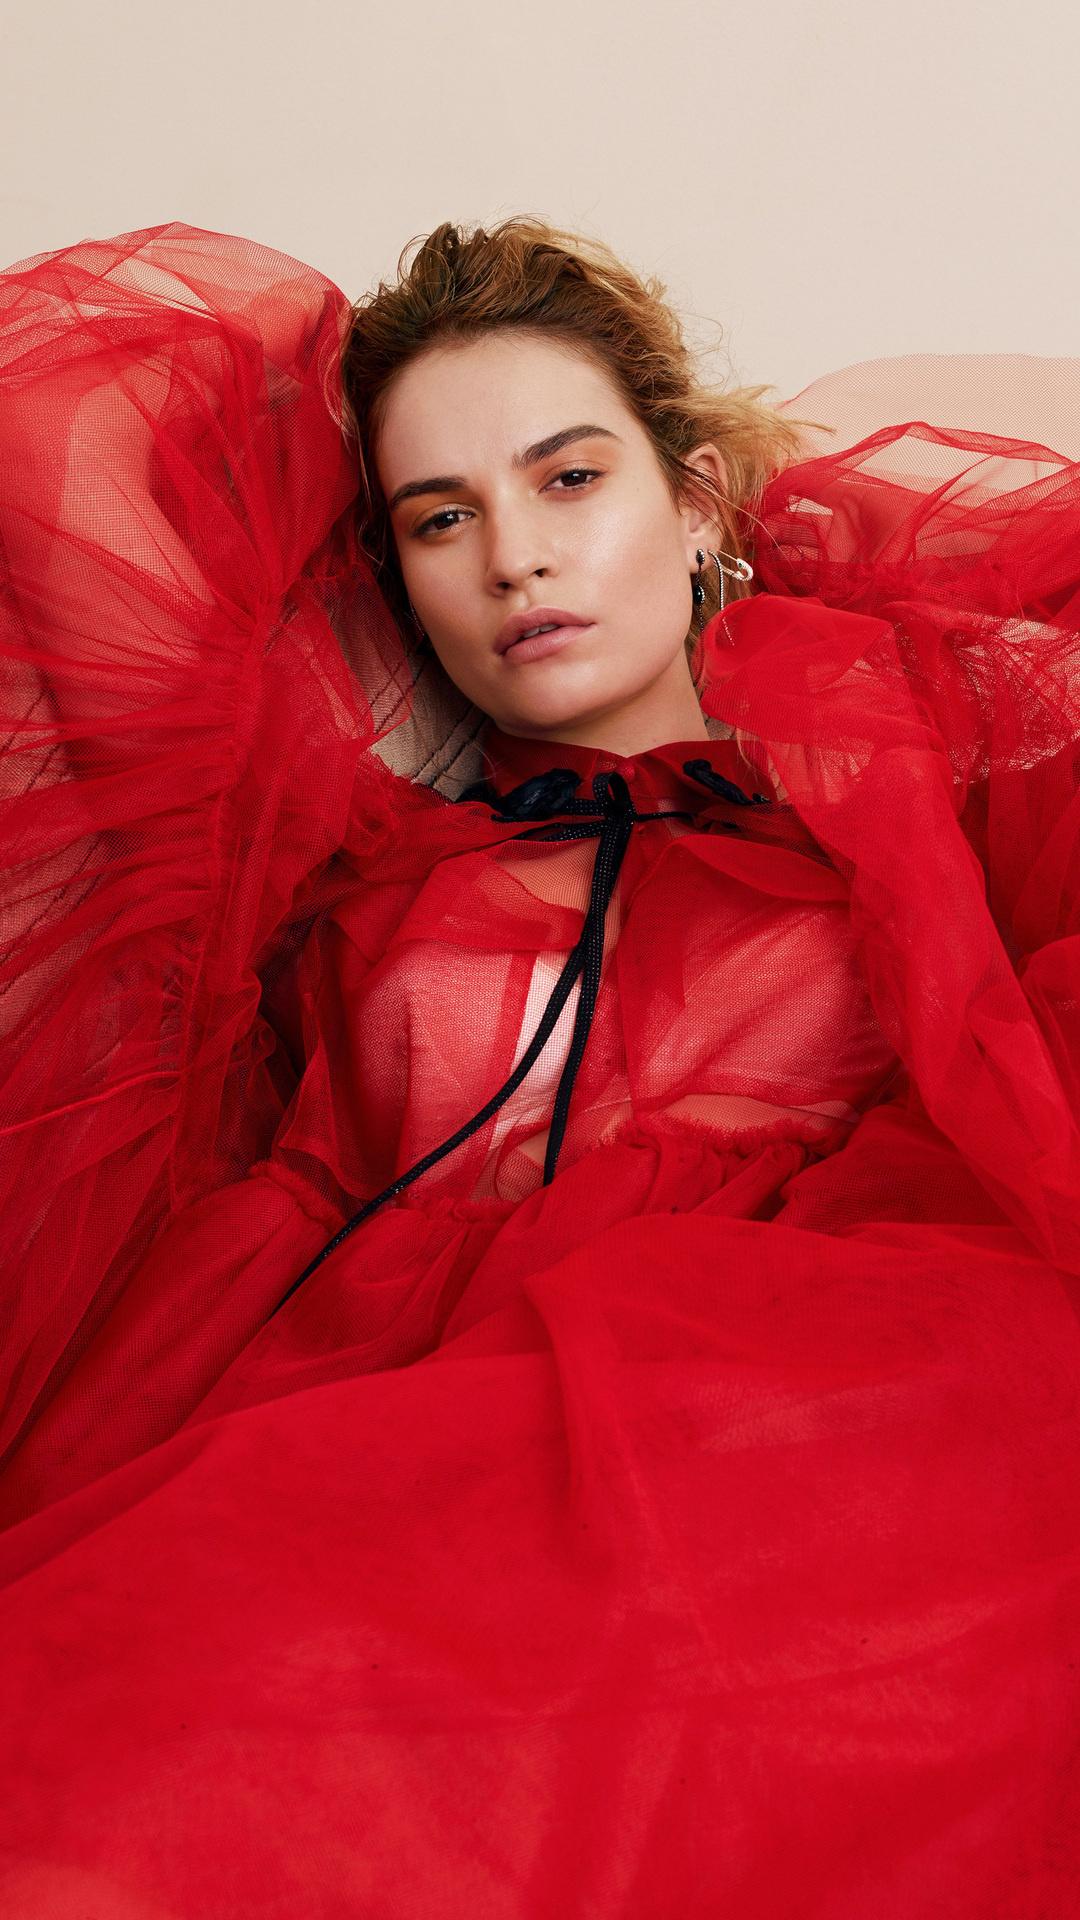 Lily James allure, Photoshoot 2018, iPhone 7, 1080x1920 Full HD Handy